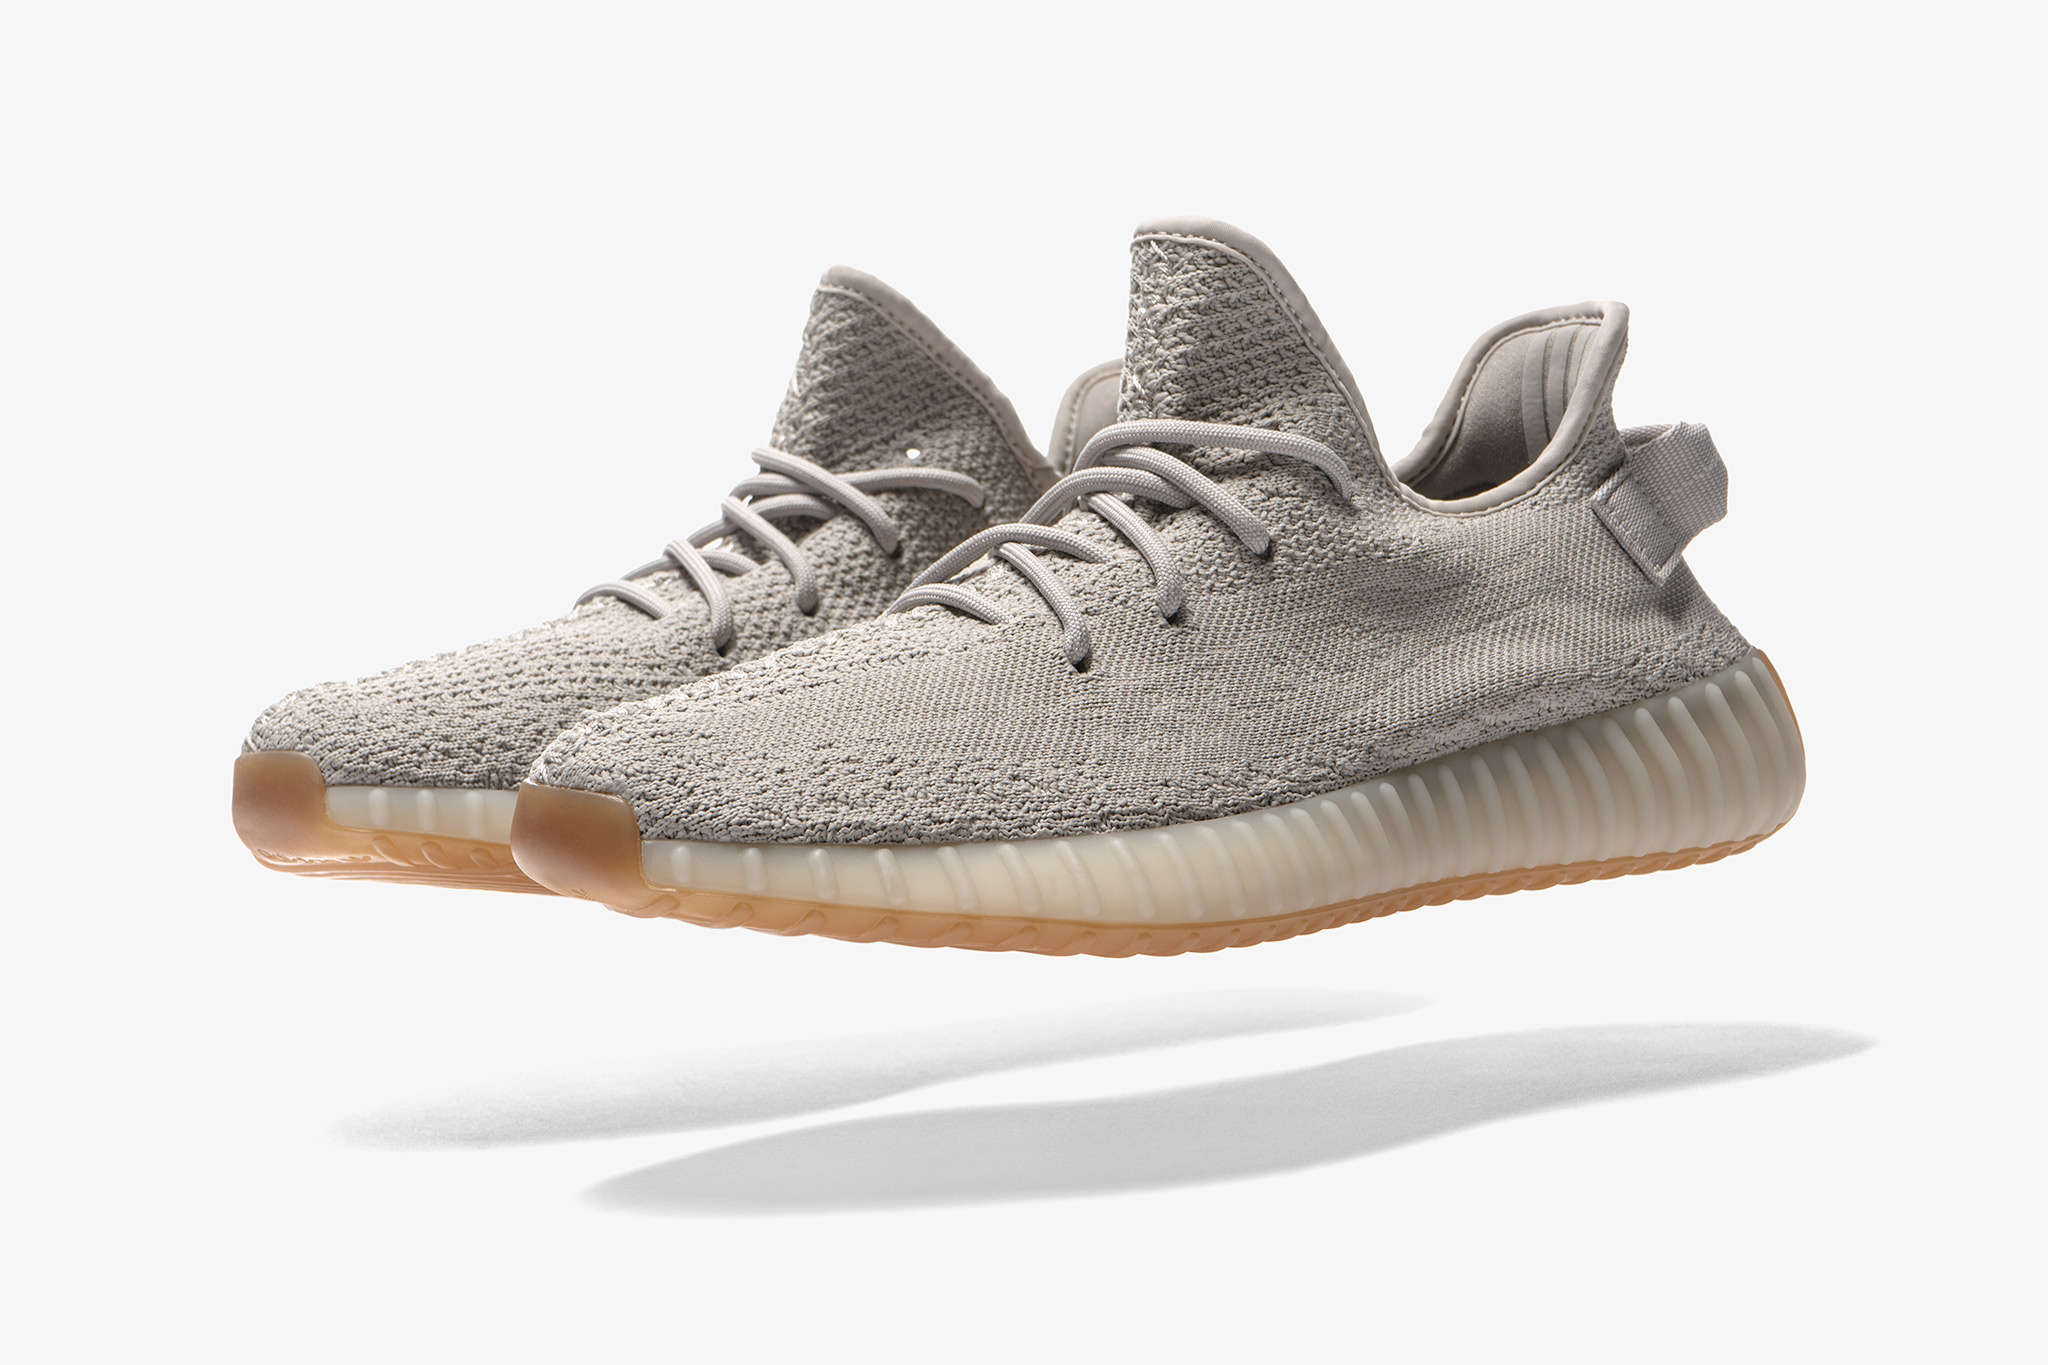 yeezy 350 sesame size guide